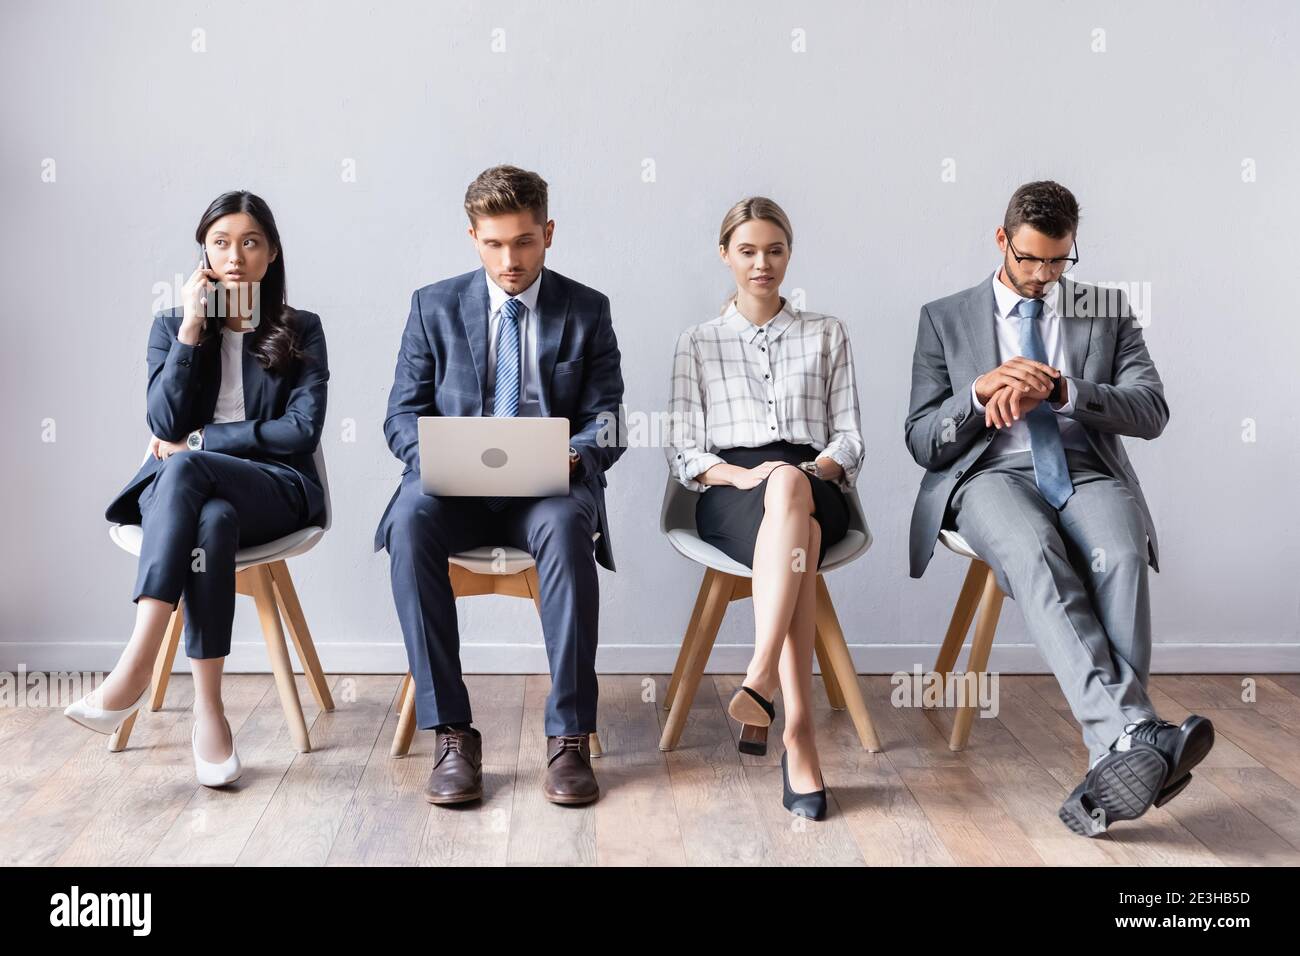 Multiethnic business people with laptop and smartphone waiting in hall Stock Photo